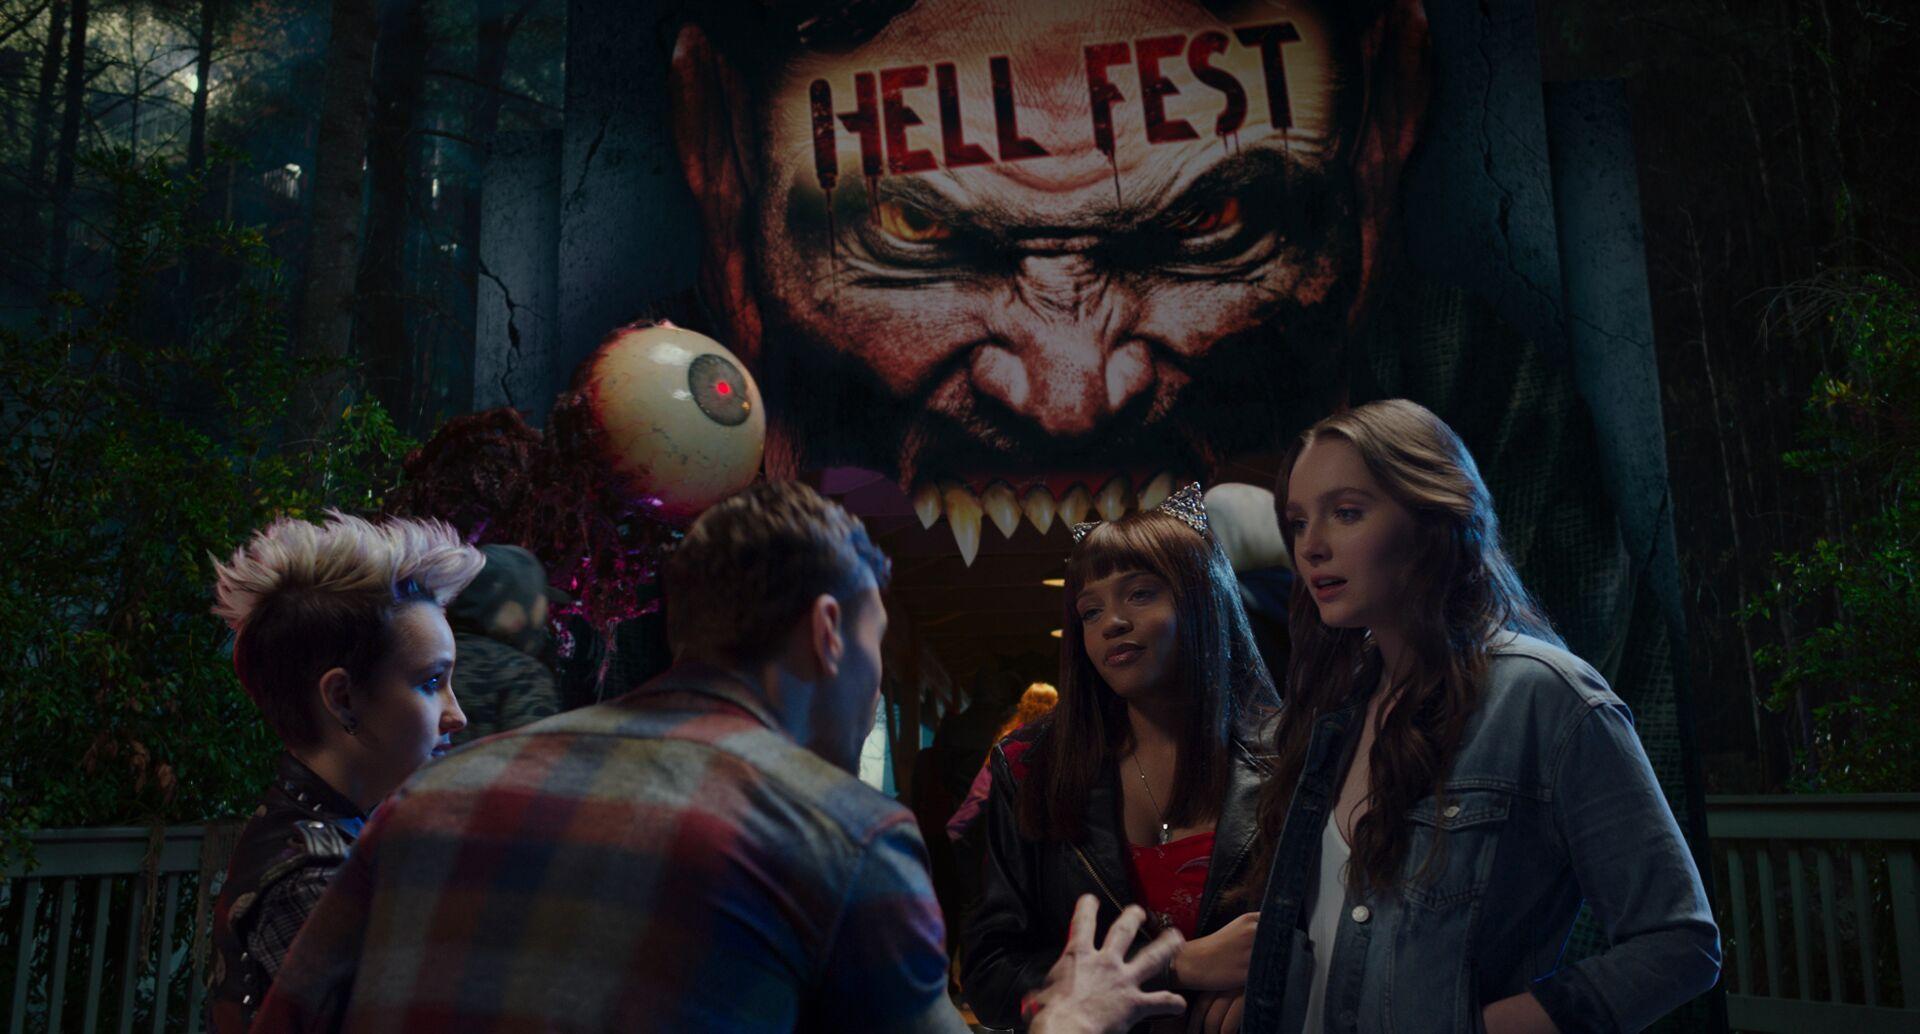 Poster Art and Image Invite You to a Halloween 'Hell Fest'